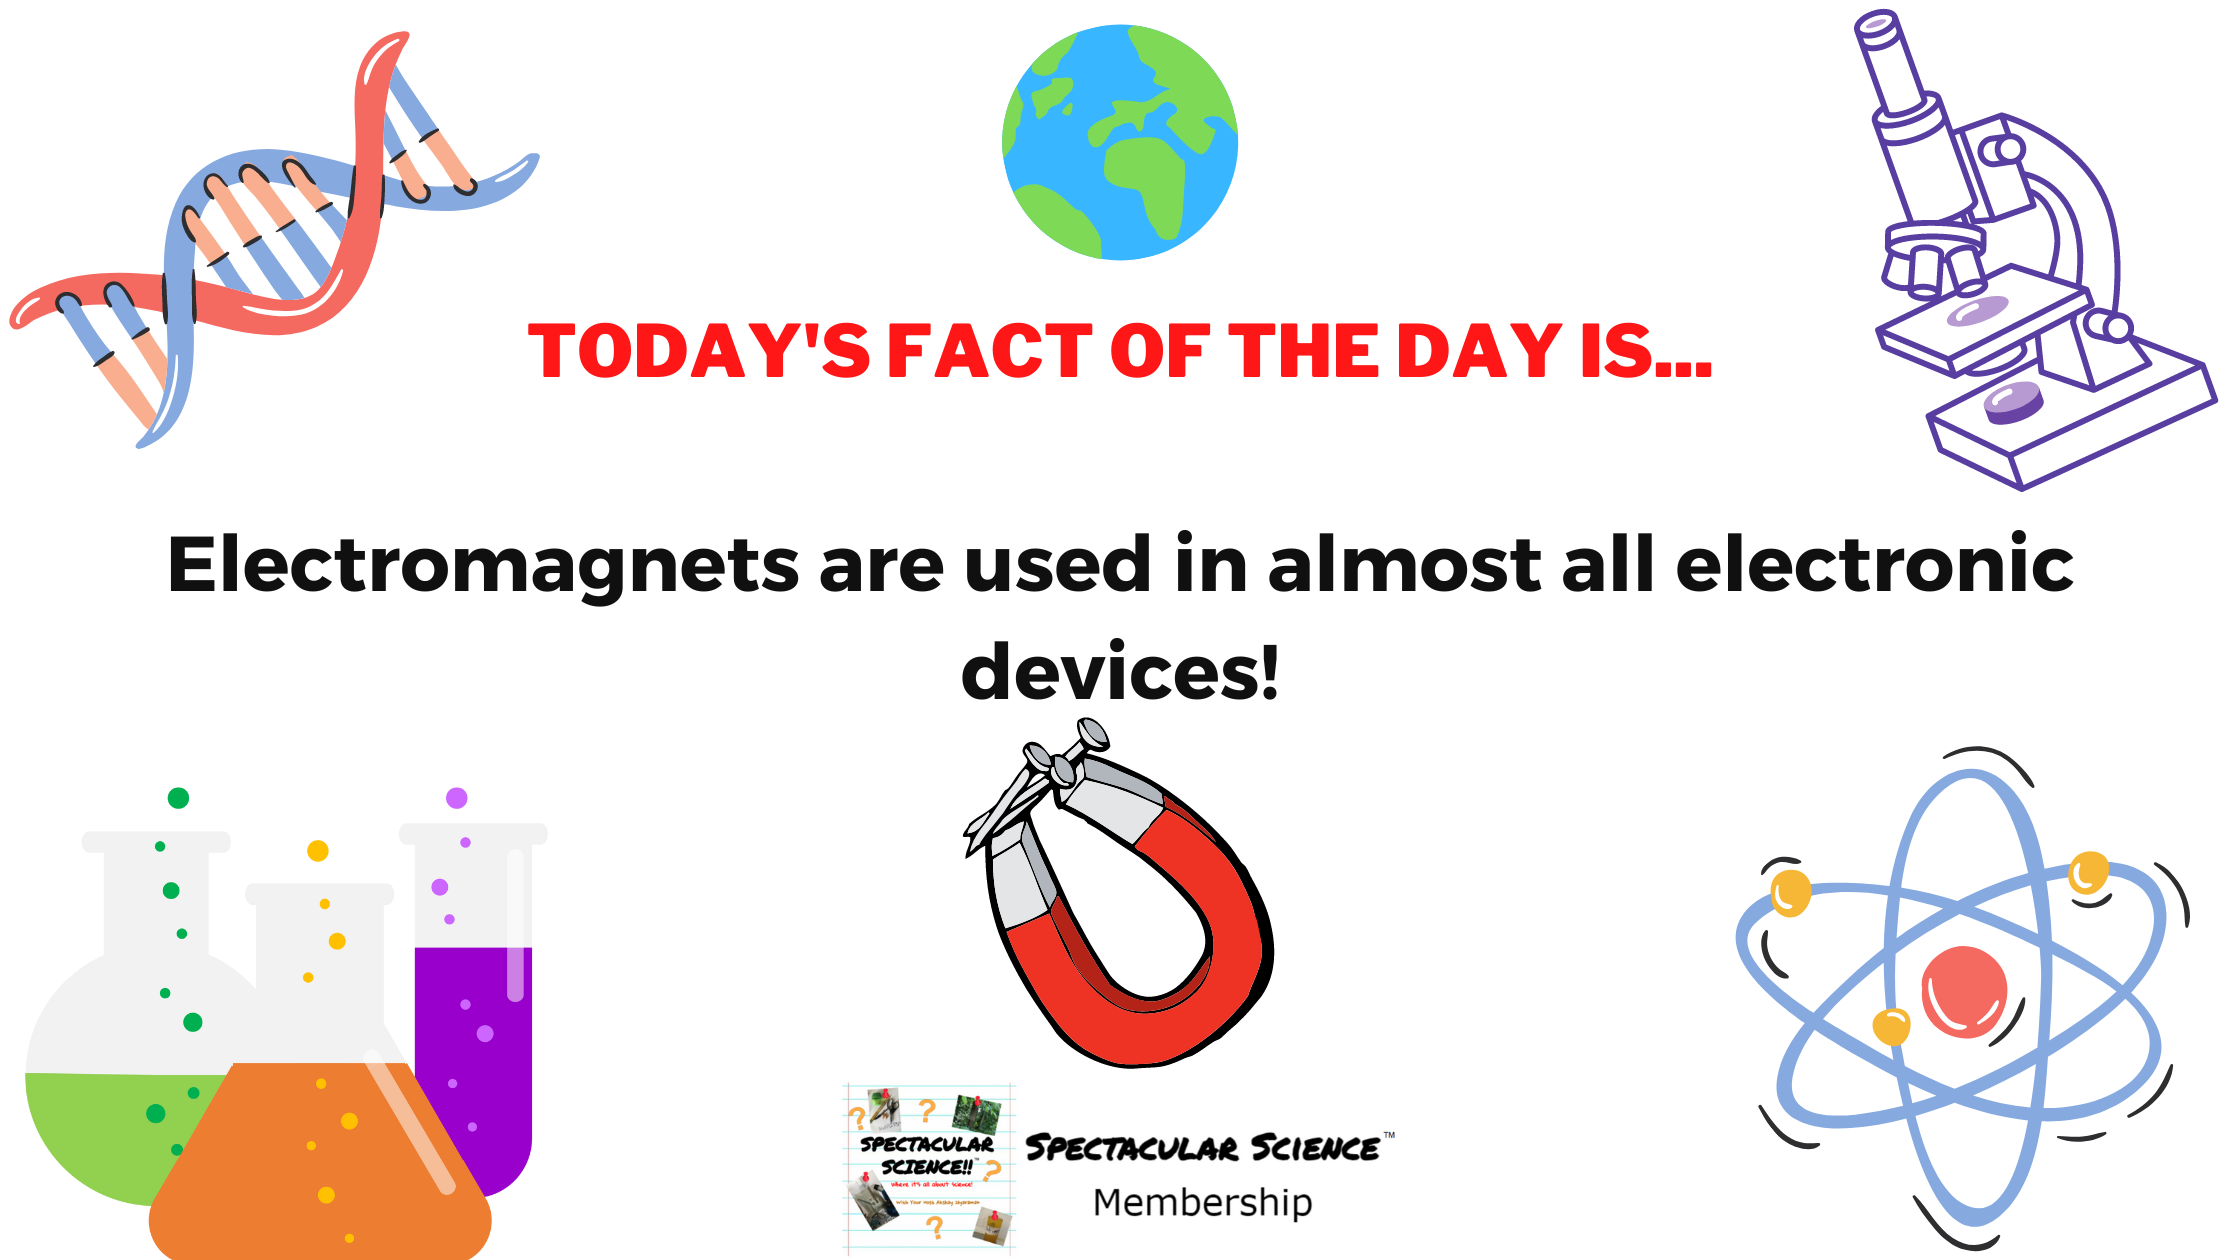 Fact of the Day Image July 14th